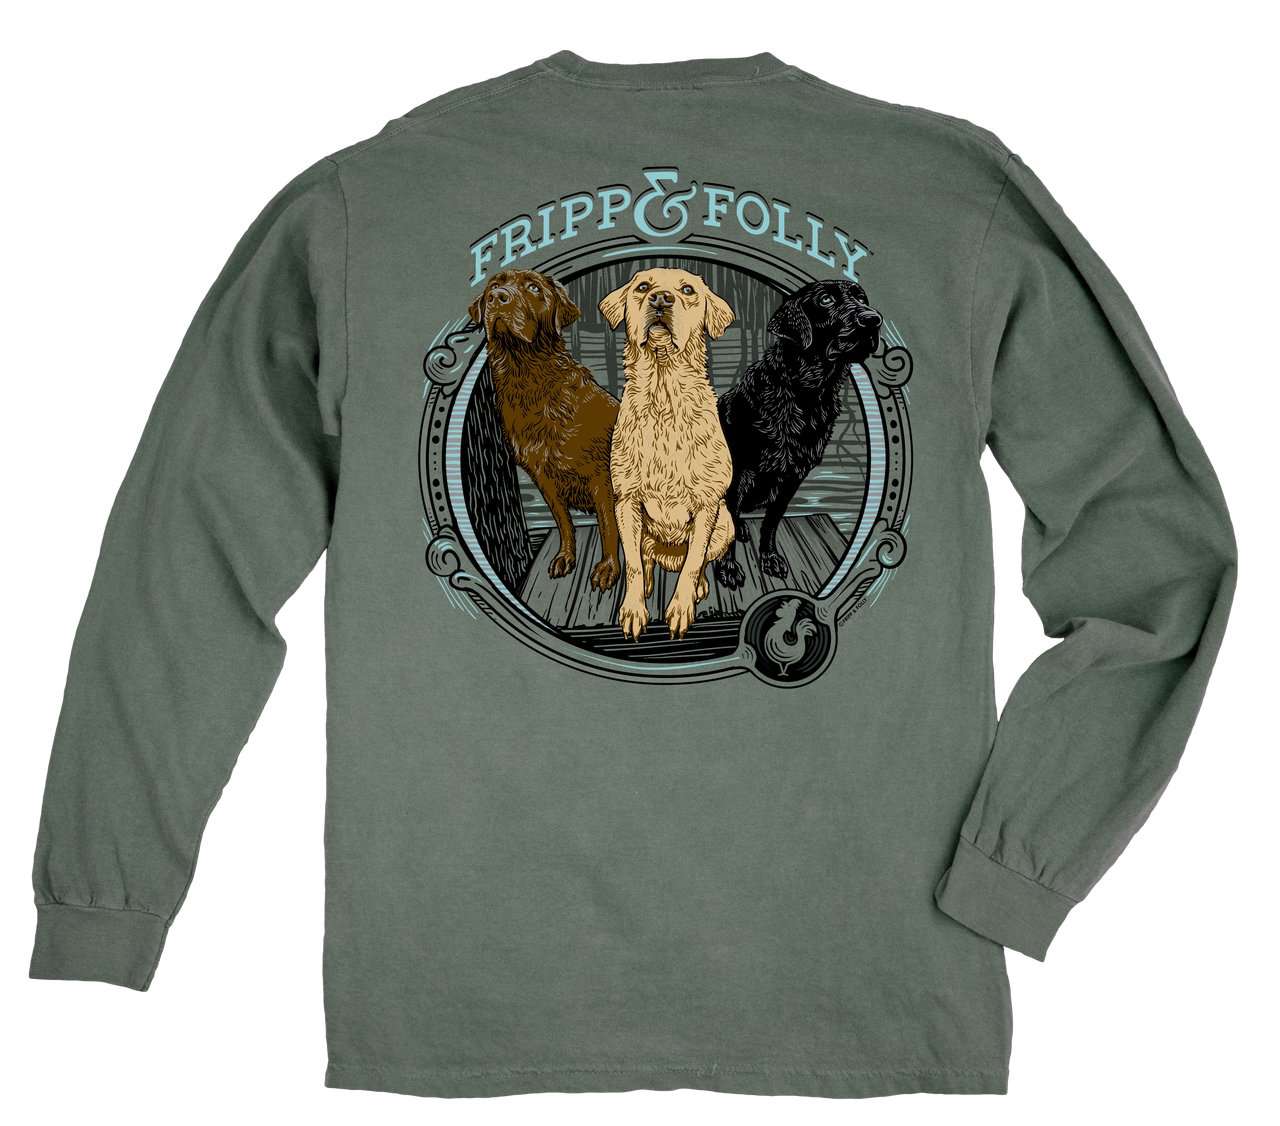 Three Dogs Long Sleeve Tee in Light Green by Fripp & Folly - Country Club Prep